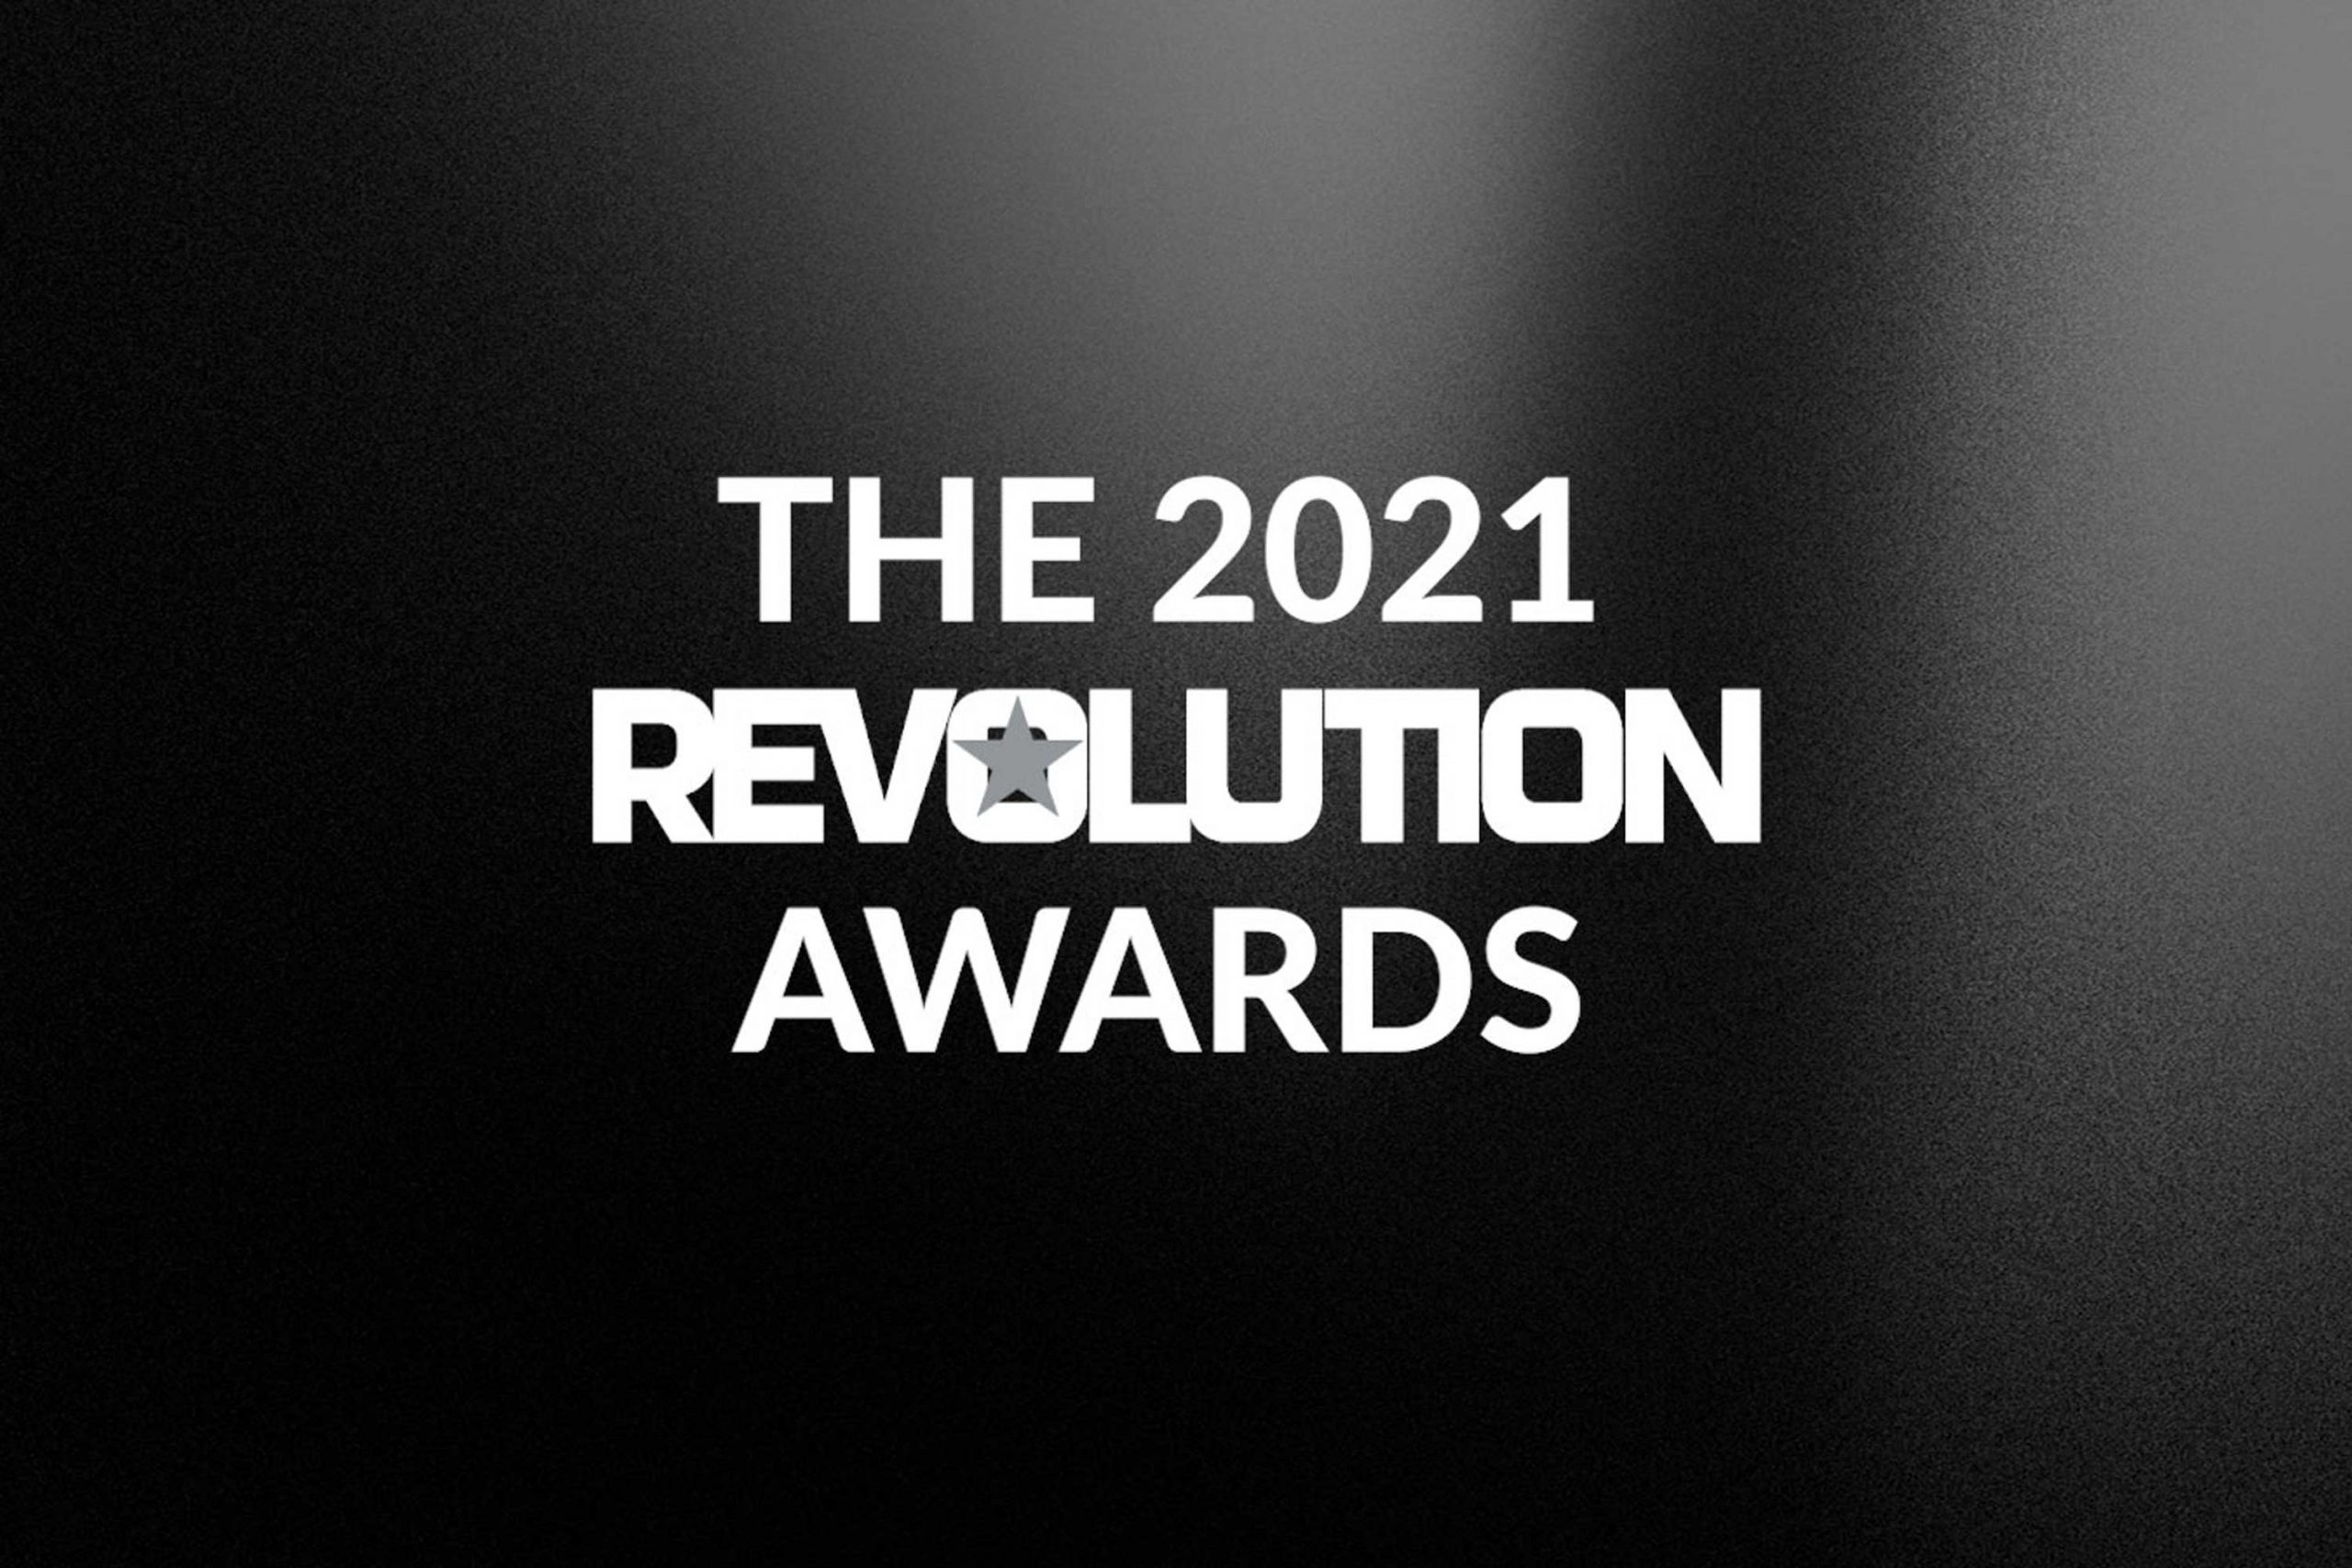 Revolution Awards 2021: Celebrating the Best of The Year